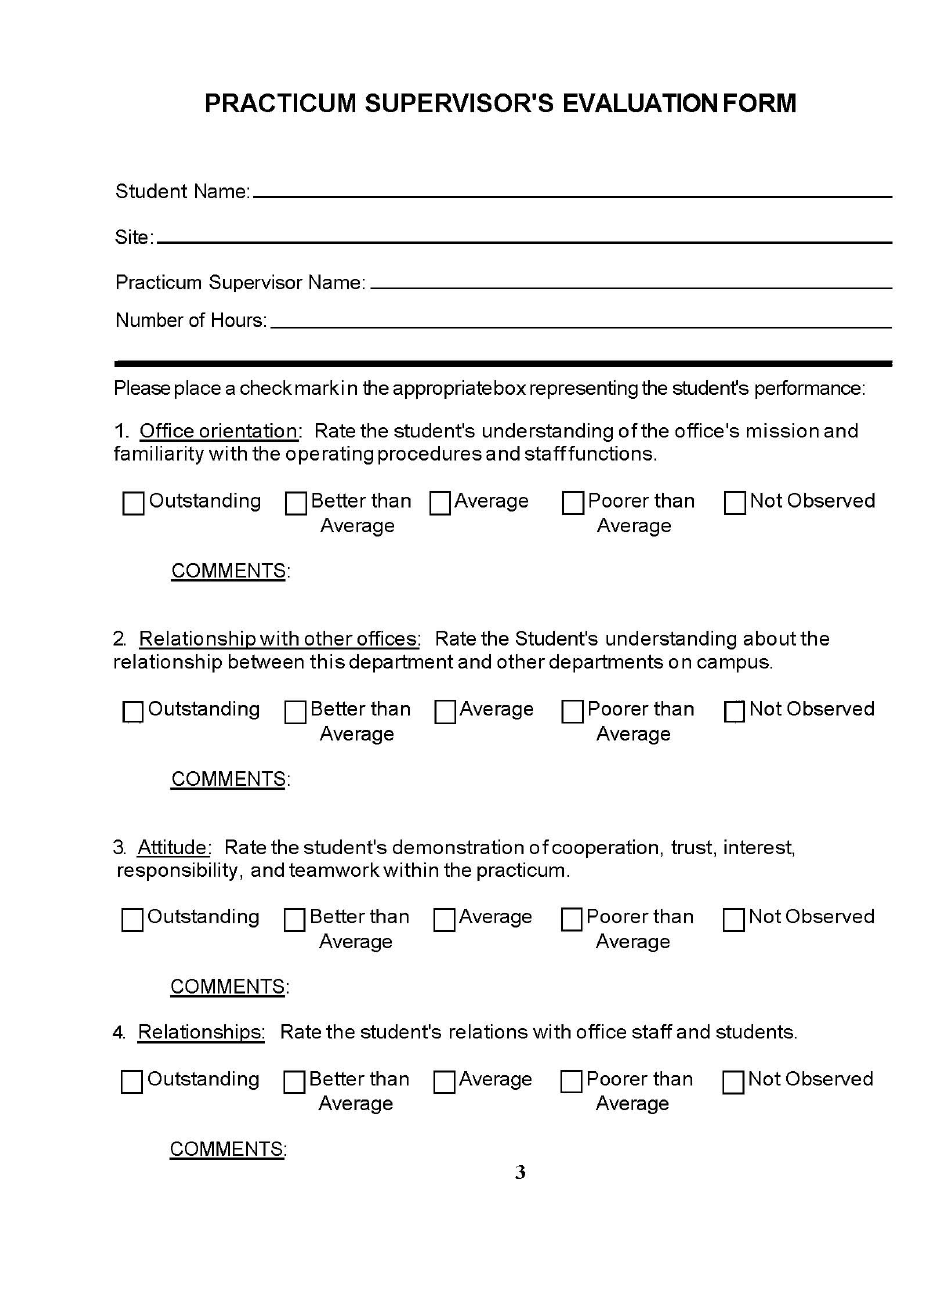 Practicum Suprevisor's Evaluation Form - Fill Out, Sign Online and ...